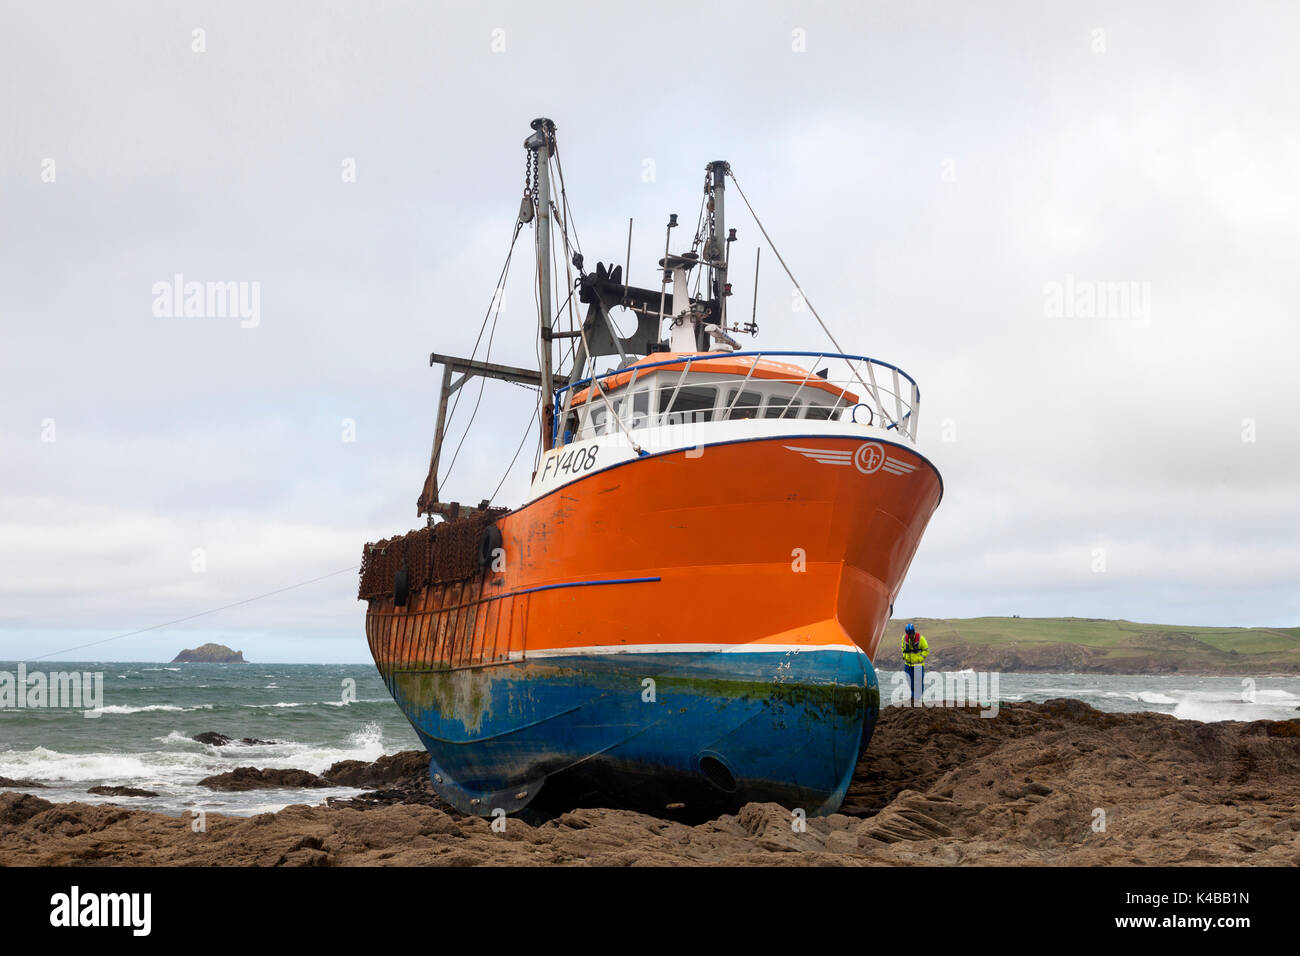 Greenaway Beach, Trebetherick, Cornwall, U.K. 5th September 2017. HM Coastguard watch over a stricken fishing trawler. The Cornish registered Le Men Du, reported to be worth £1M (GBP) ran aground on Tuesday morning. The vessel was re-floated at high tide Tuesday evening. Credit: Mark Richardson/Alamy Live News Stock Photo